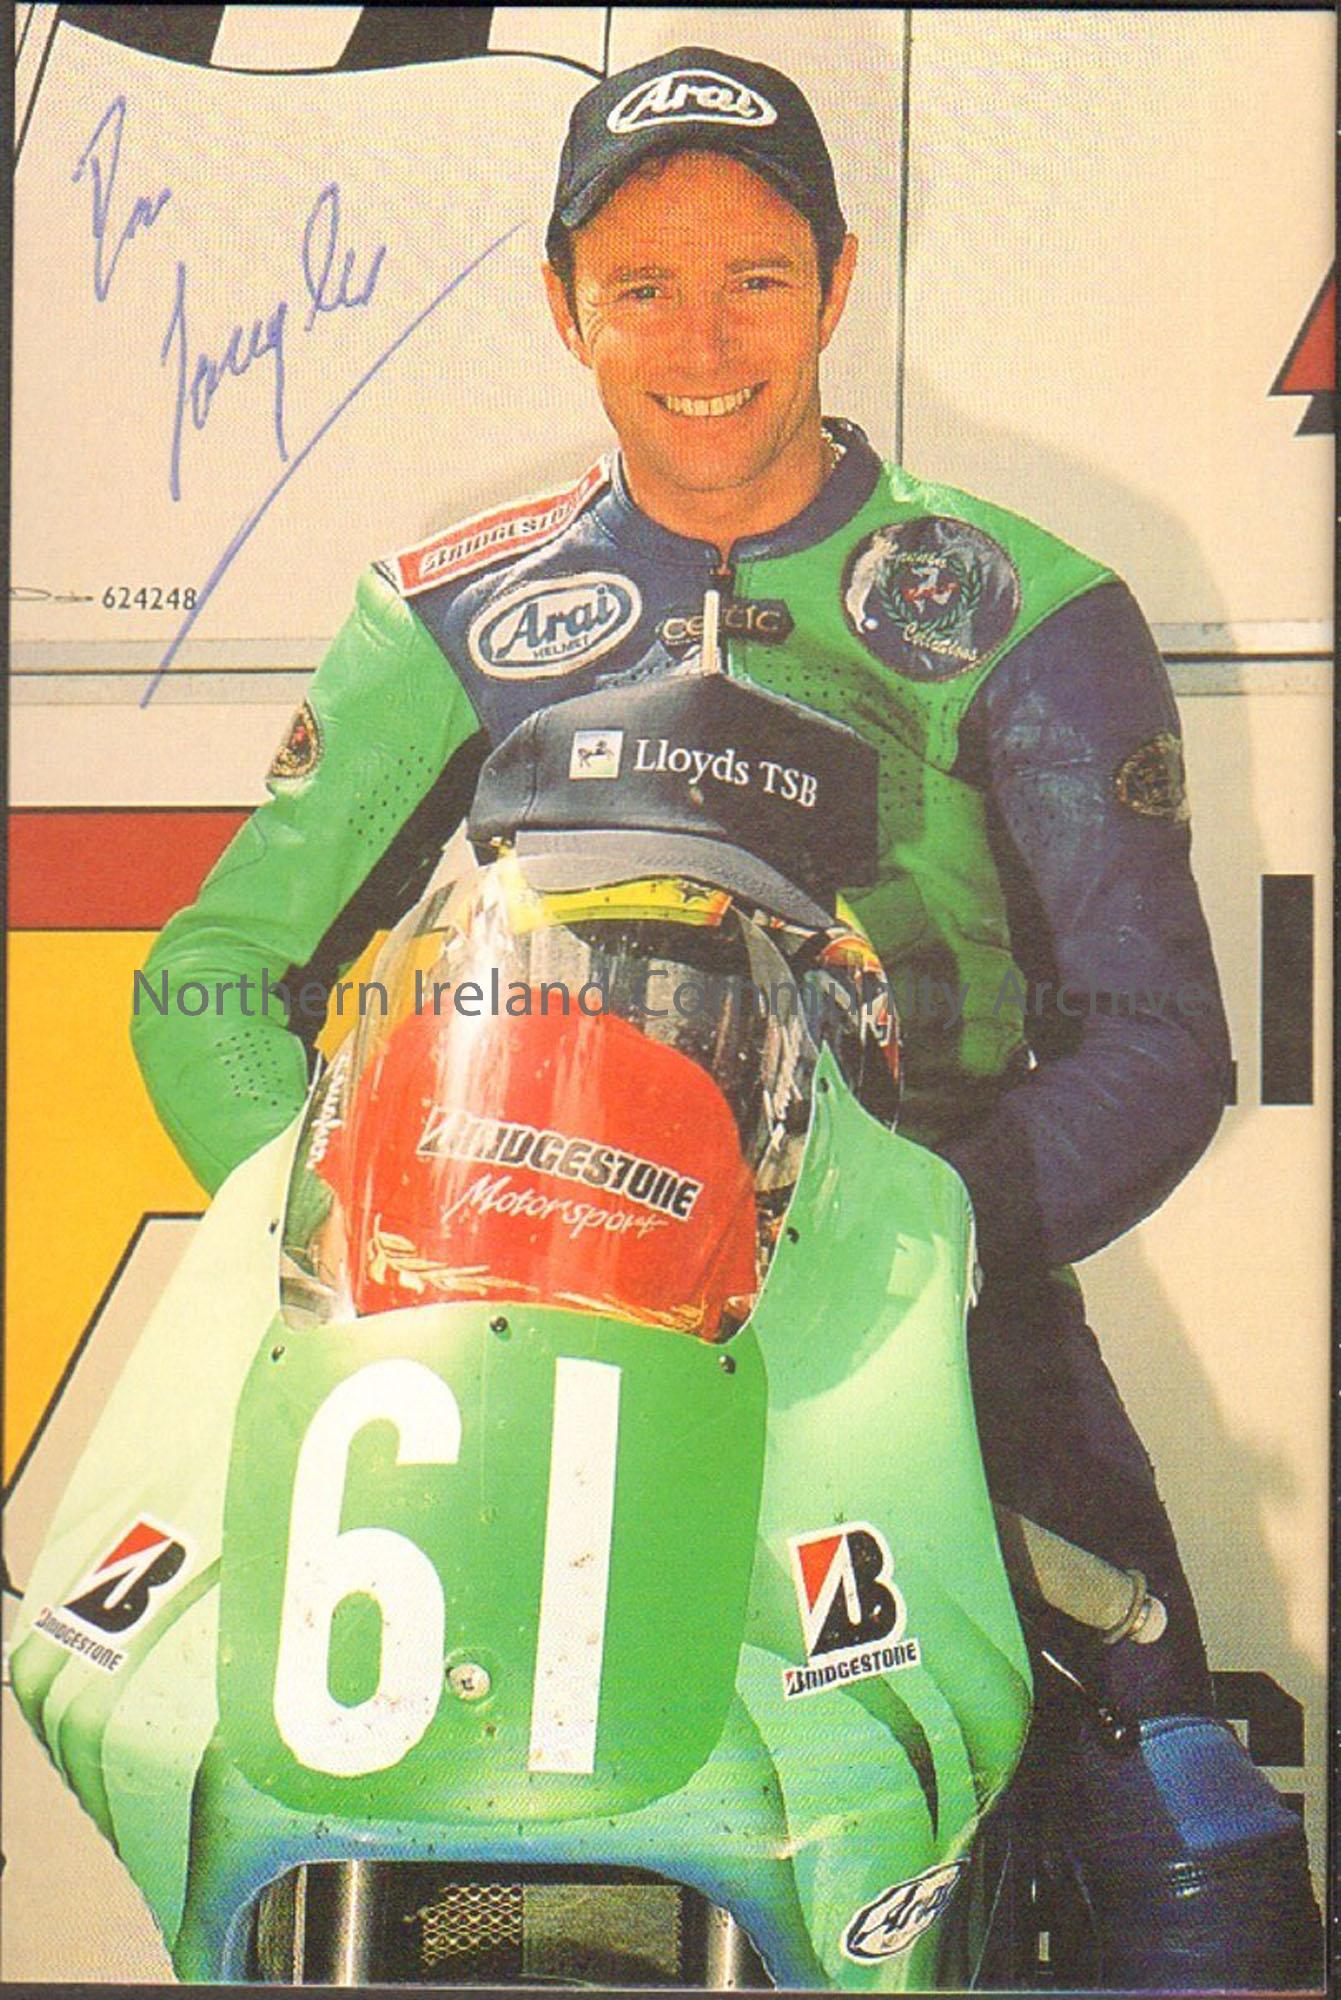 Signed photograph of Ian Lougher sitting on a green motorbike with number 61 on the front wearing green and blue leathers and no helmet.